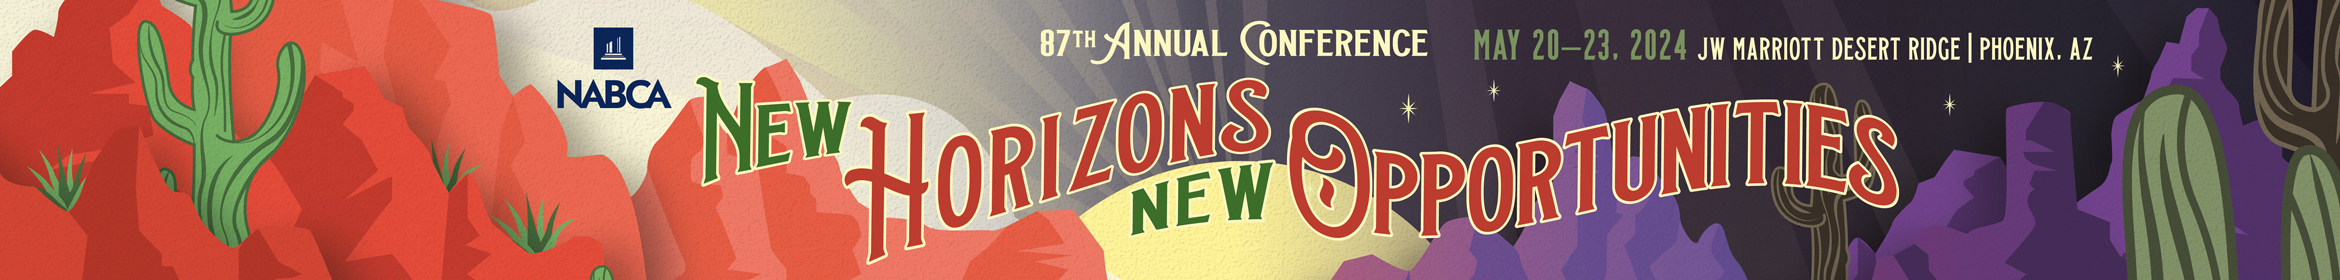 2024 NABCA 87th Annual Conference Main banner